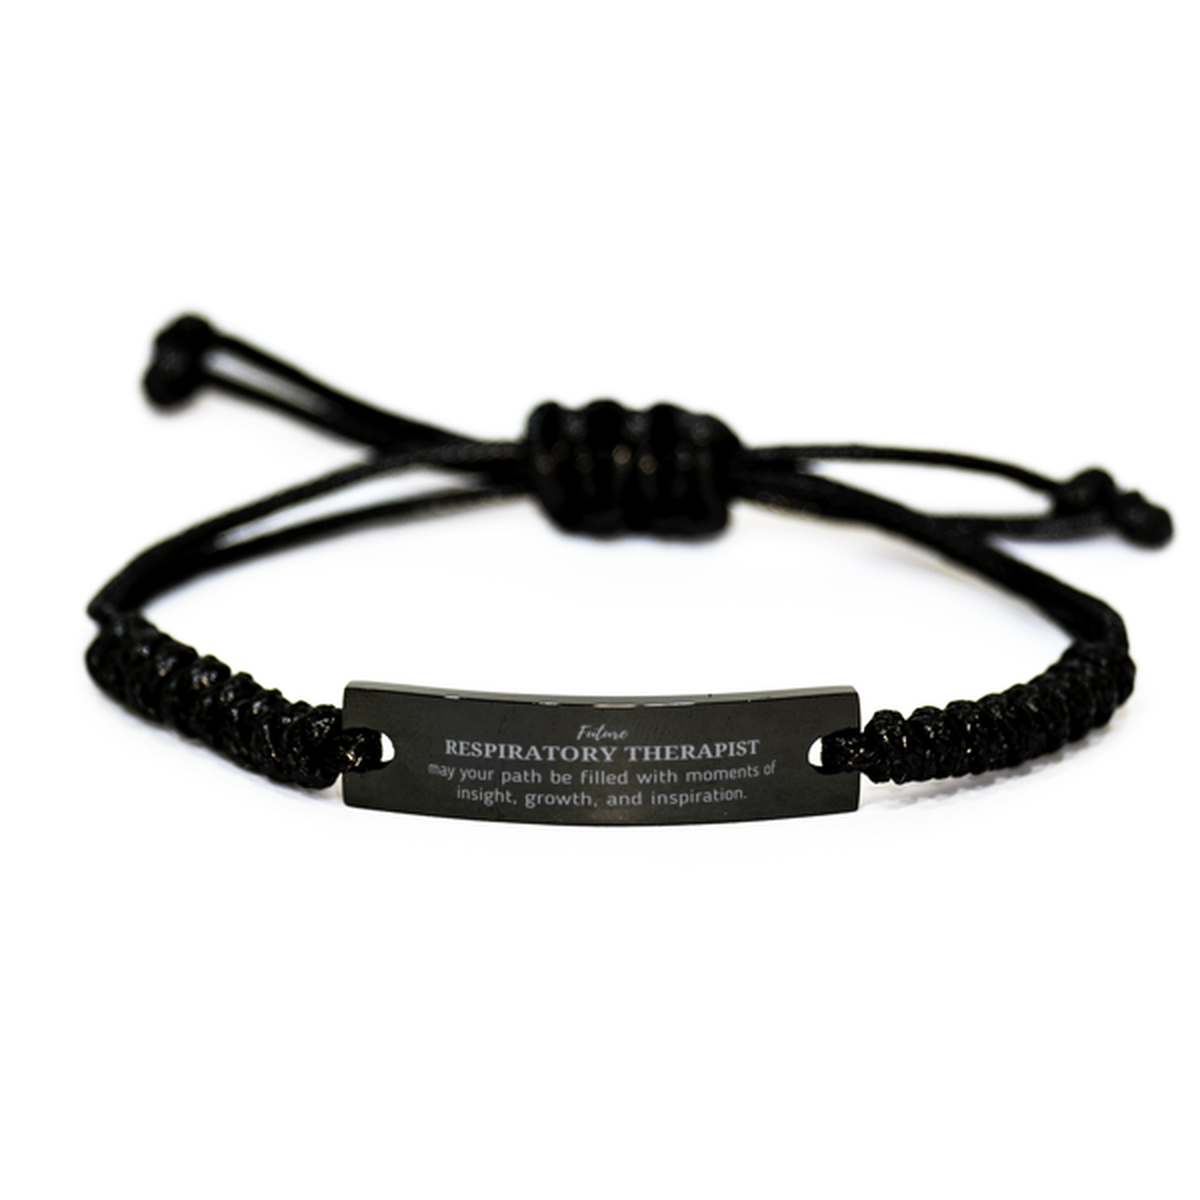 Future Respiratory Therapist Gifts, May your path be filled with moments of insight, Graduation Gifts for New Respiratory Therapist, Christmas Unique Black Rope Bracelet For Men, Women, Friends